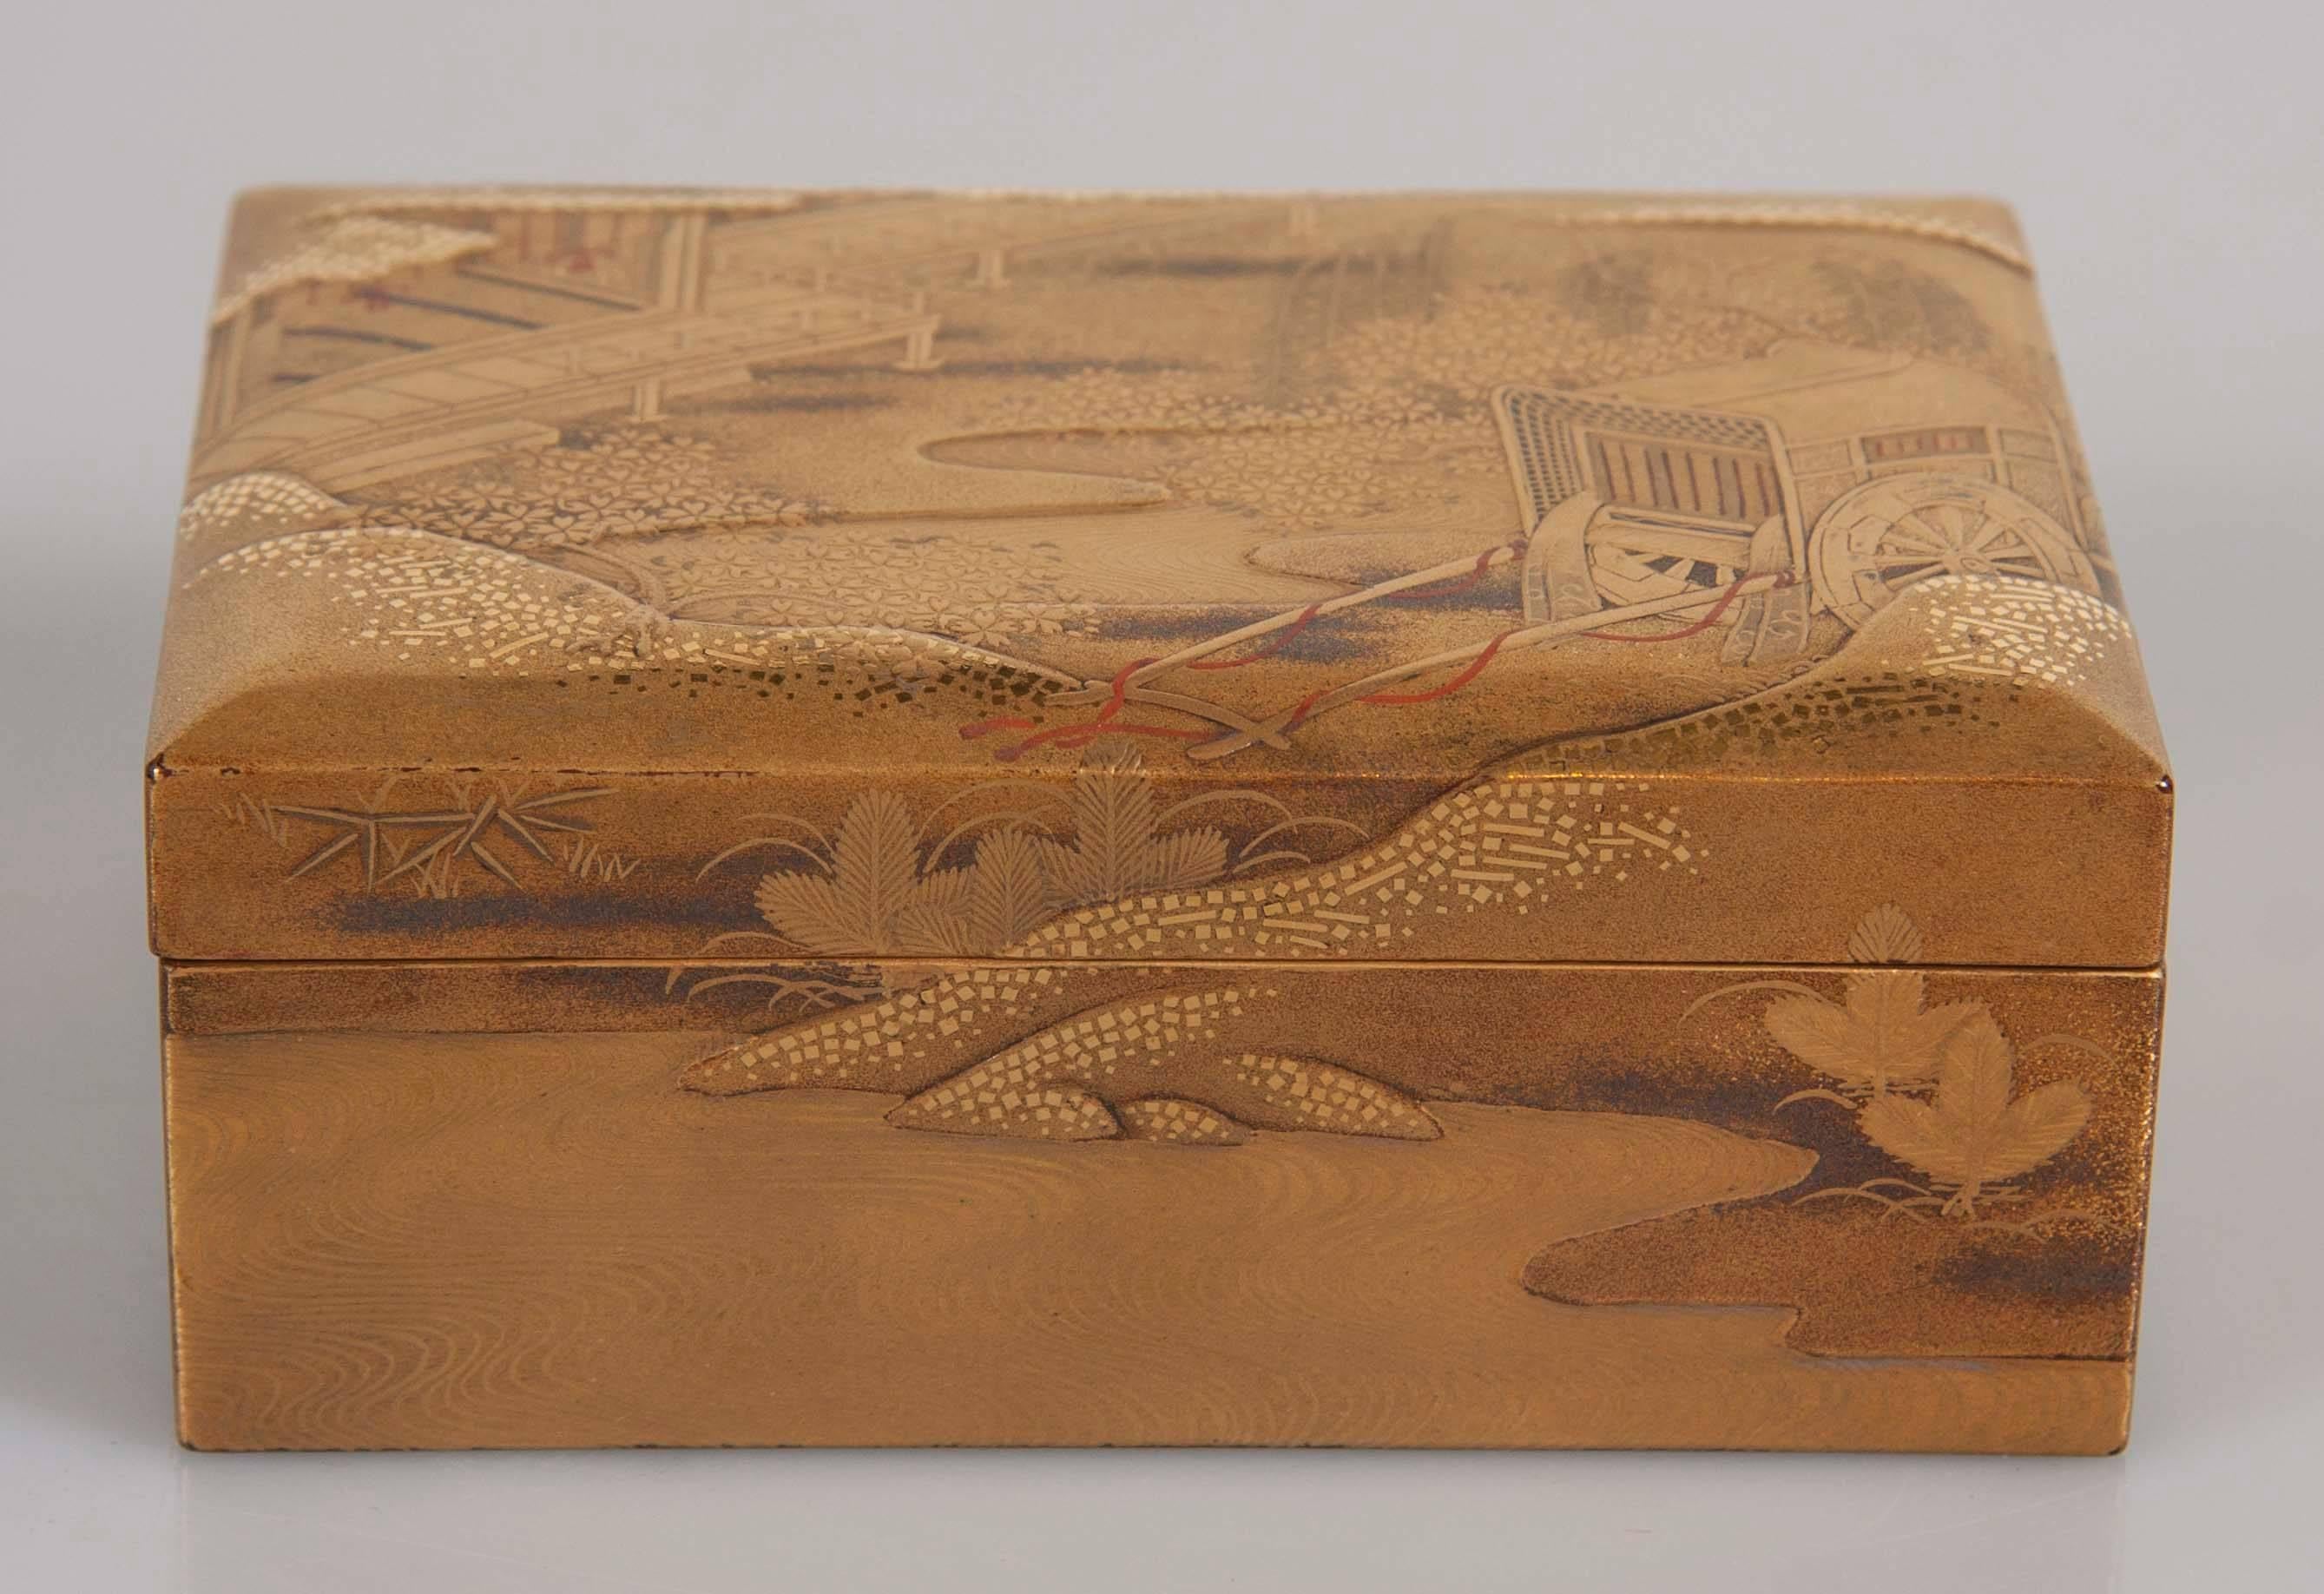 Japanese Edo period box with very finely rendered scene.  18th Century.